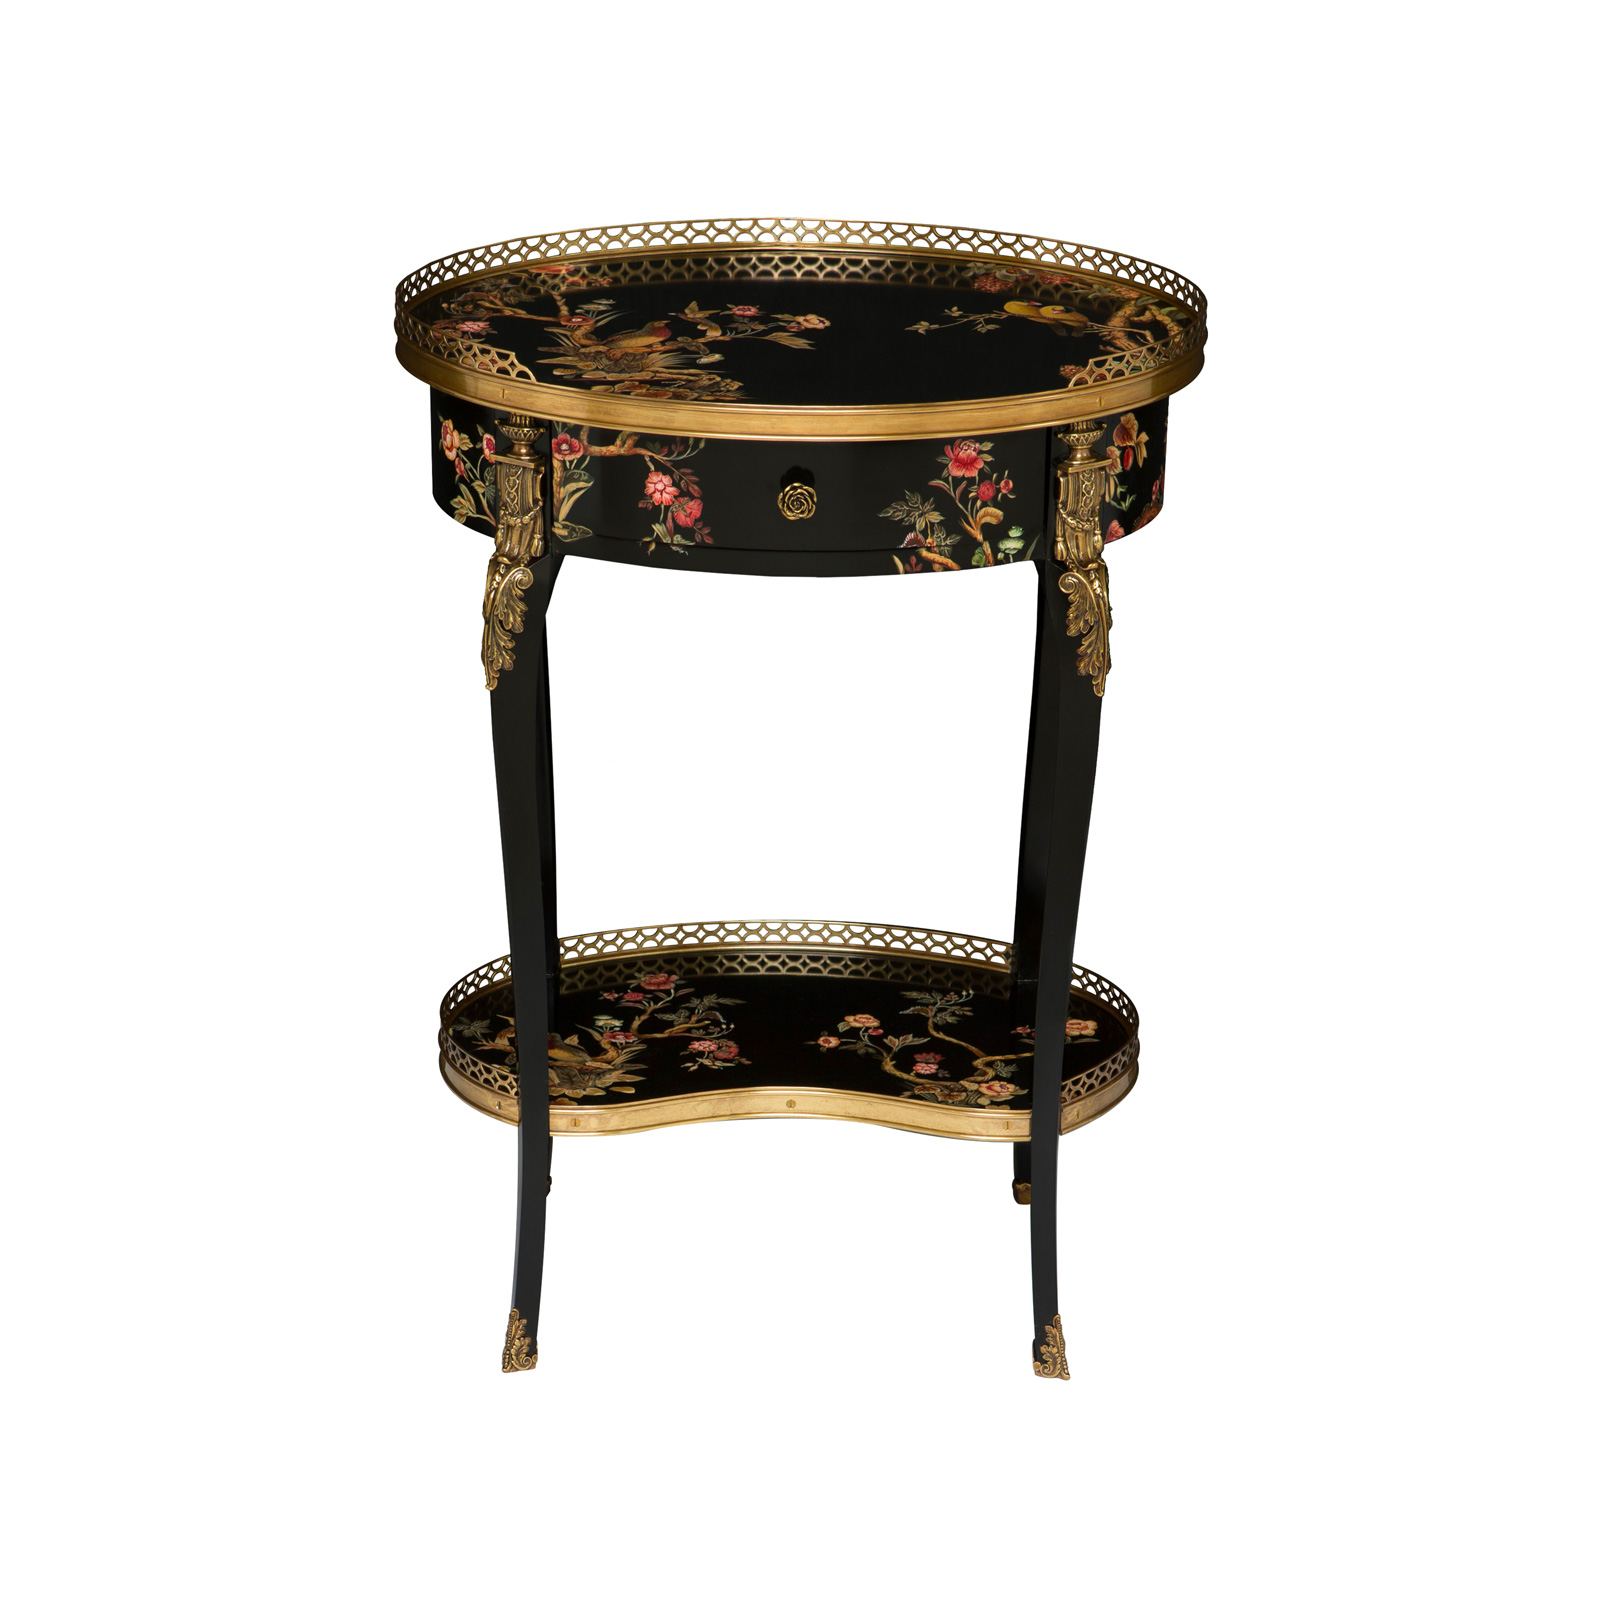 Floral Hand-Painted Black Lacquered Oval Occasional Table with Fine Brass Accents and Kidney Shaped Stretcher